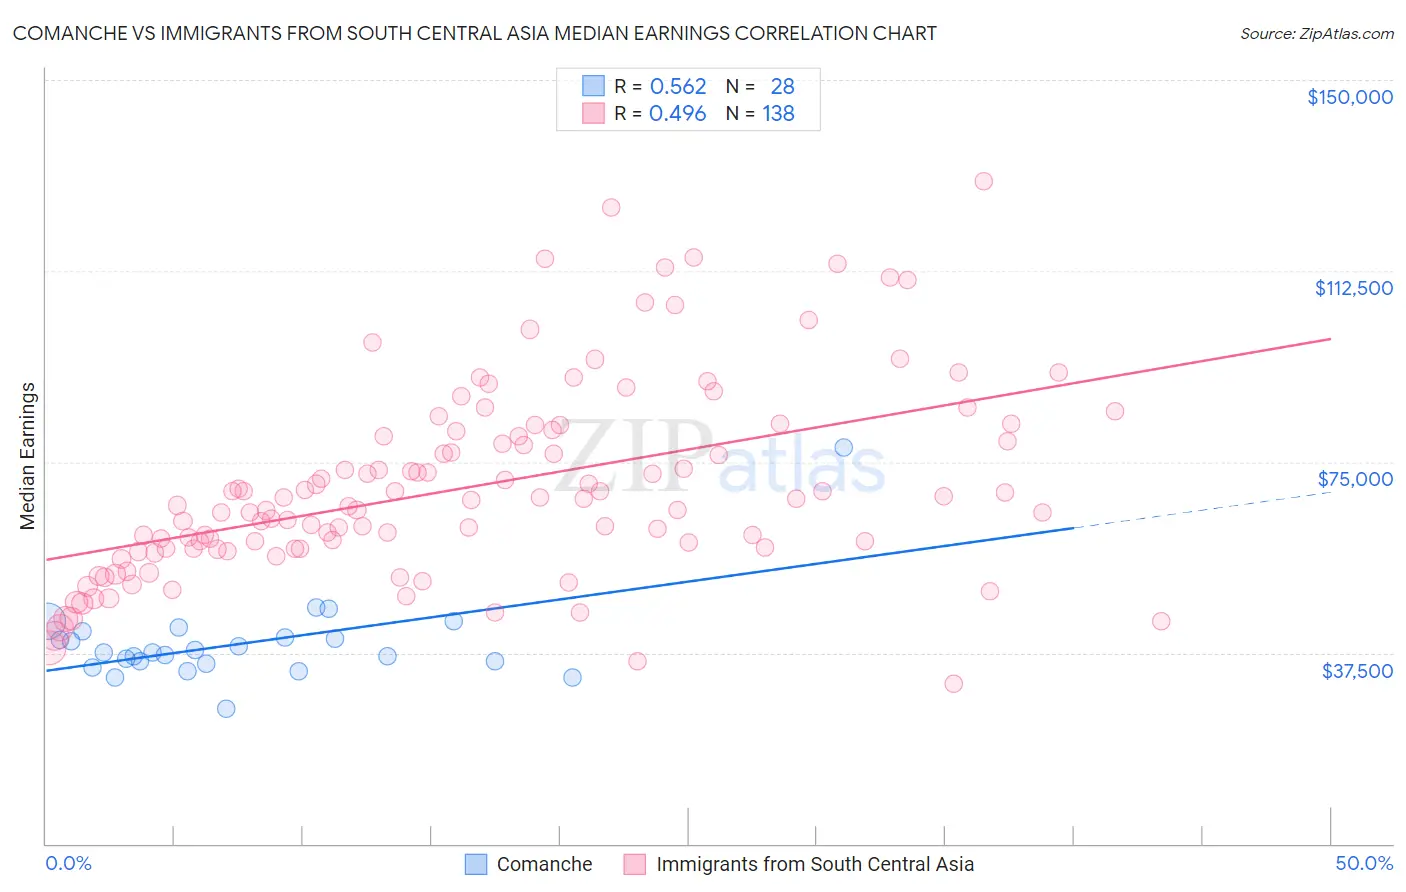 Comanche vs Immigrants from South Central Asia Median Earnings